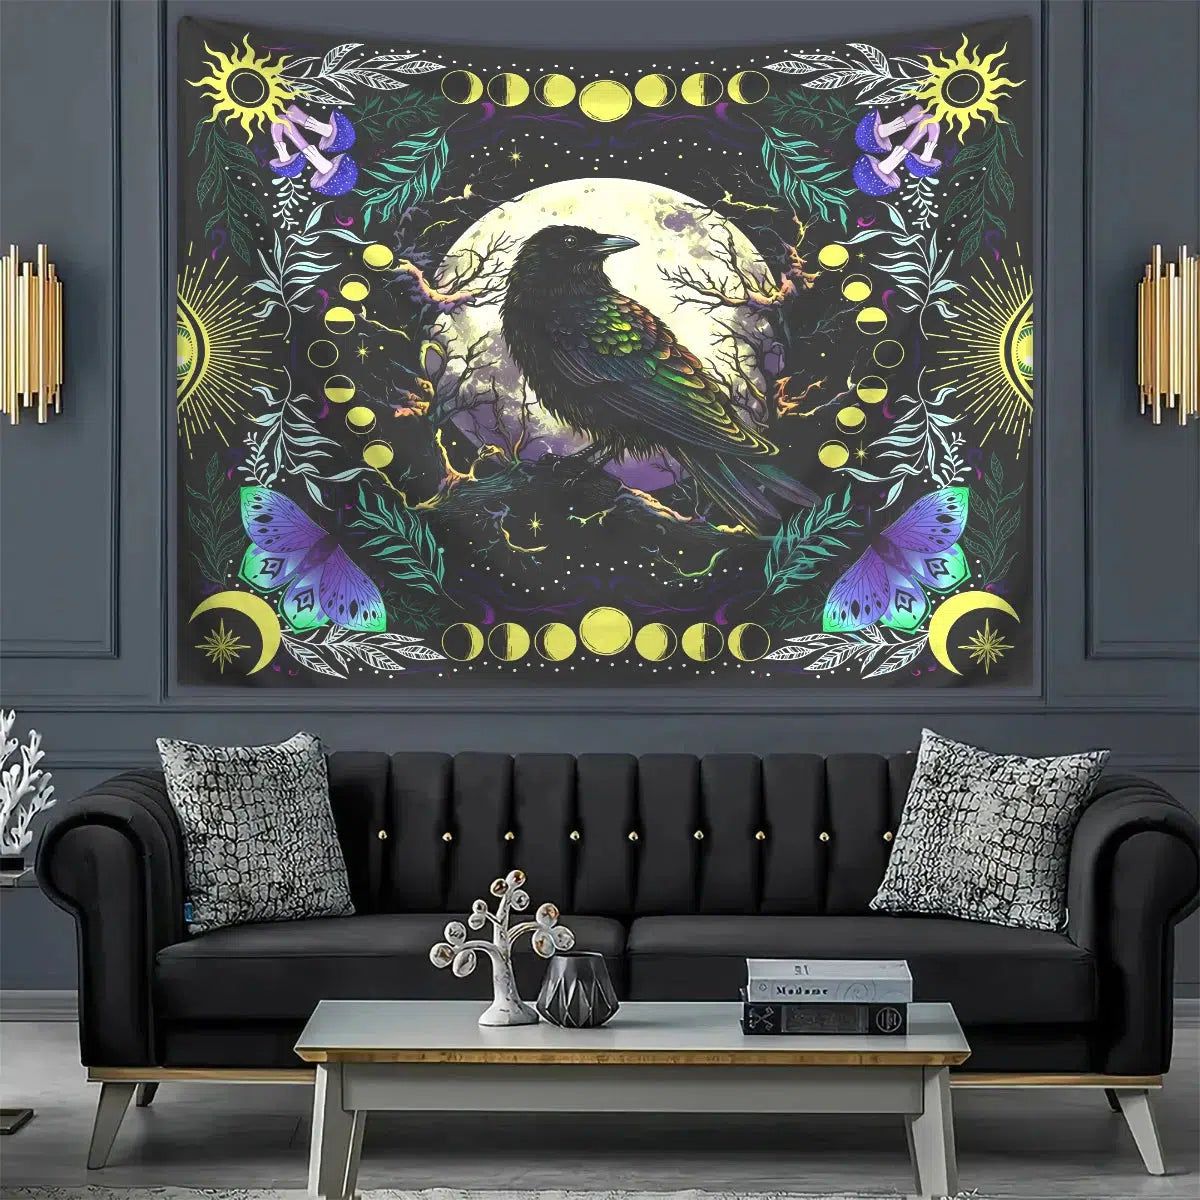 Gothic raven moon phase tapestry Mysterious moon crow tapestry-MoonChildWorld